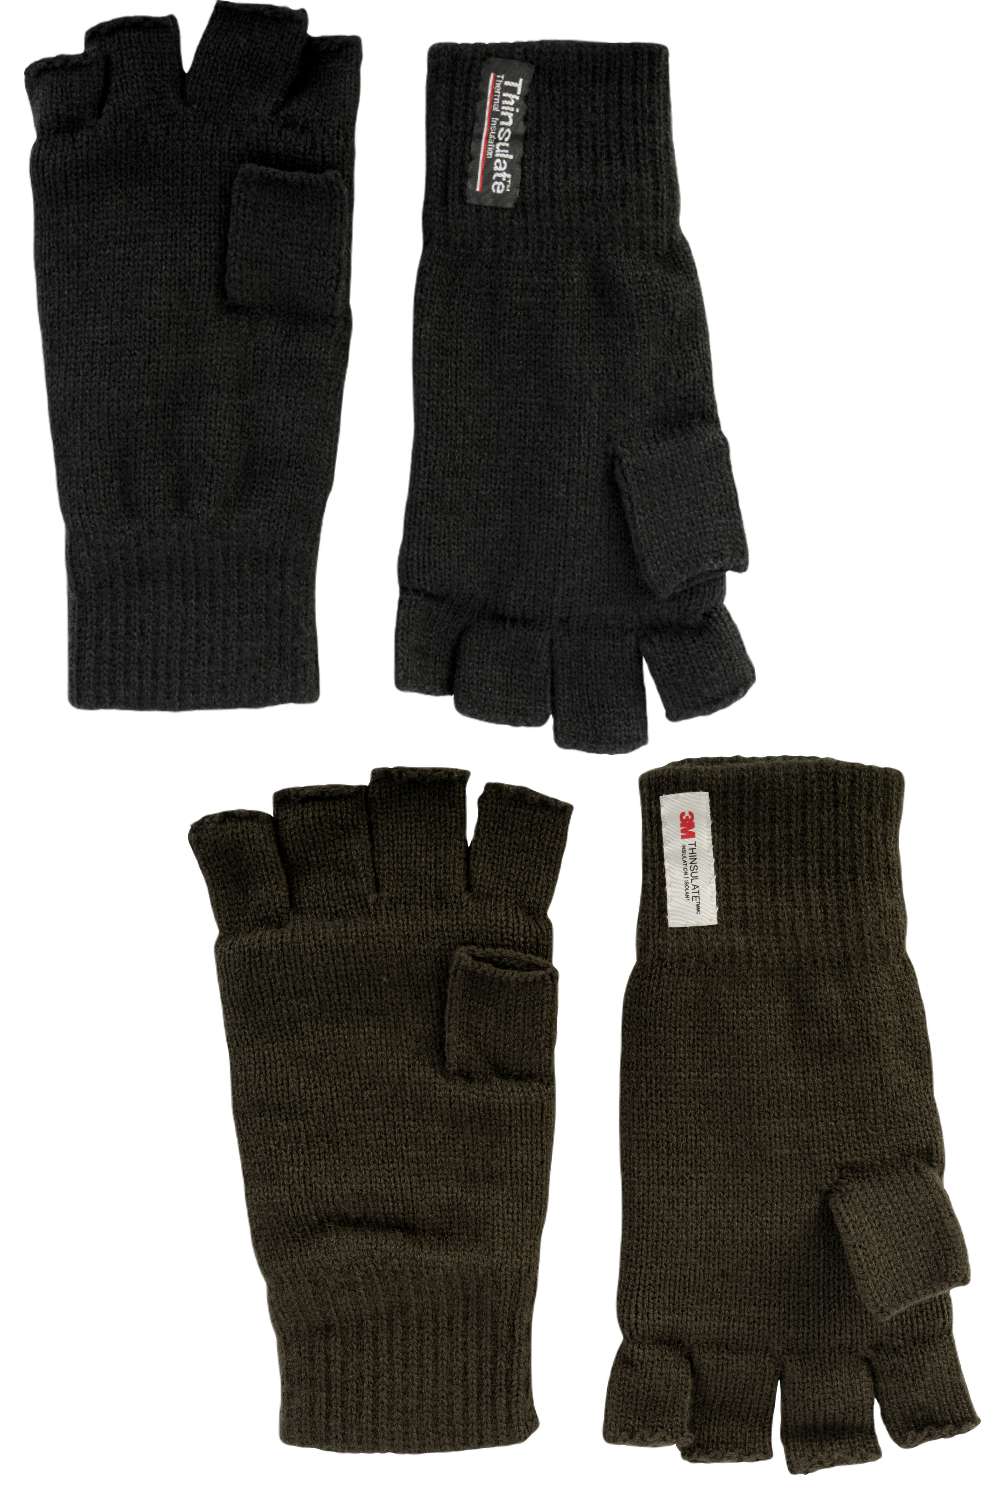 Jack Pyke Fingerless Mitts in Black and Green 